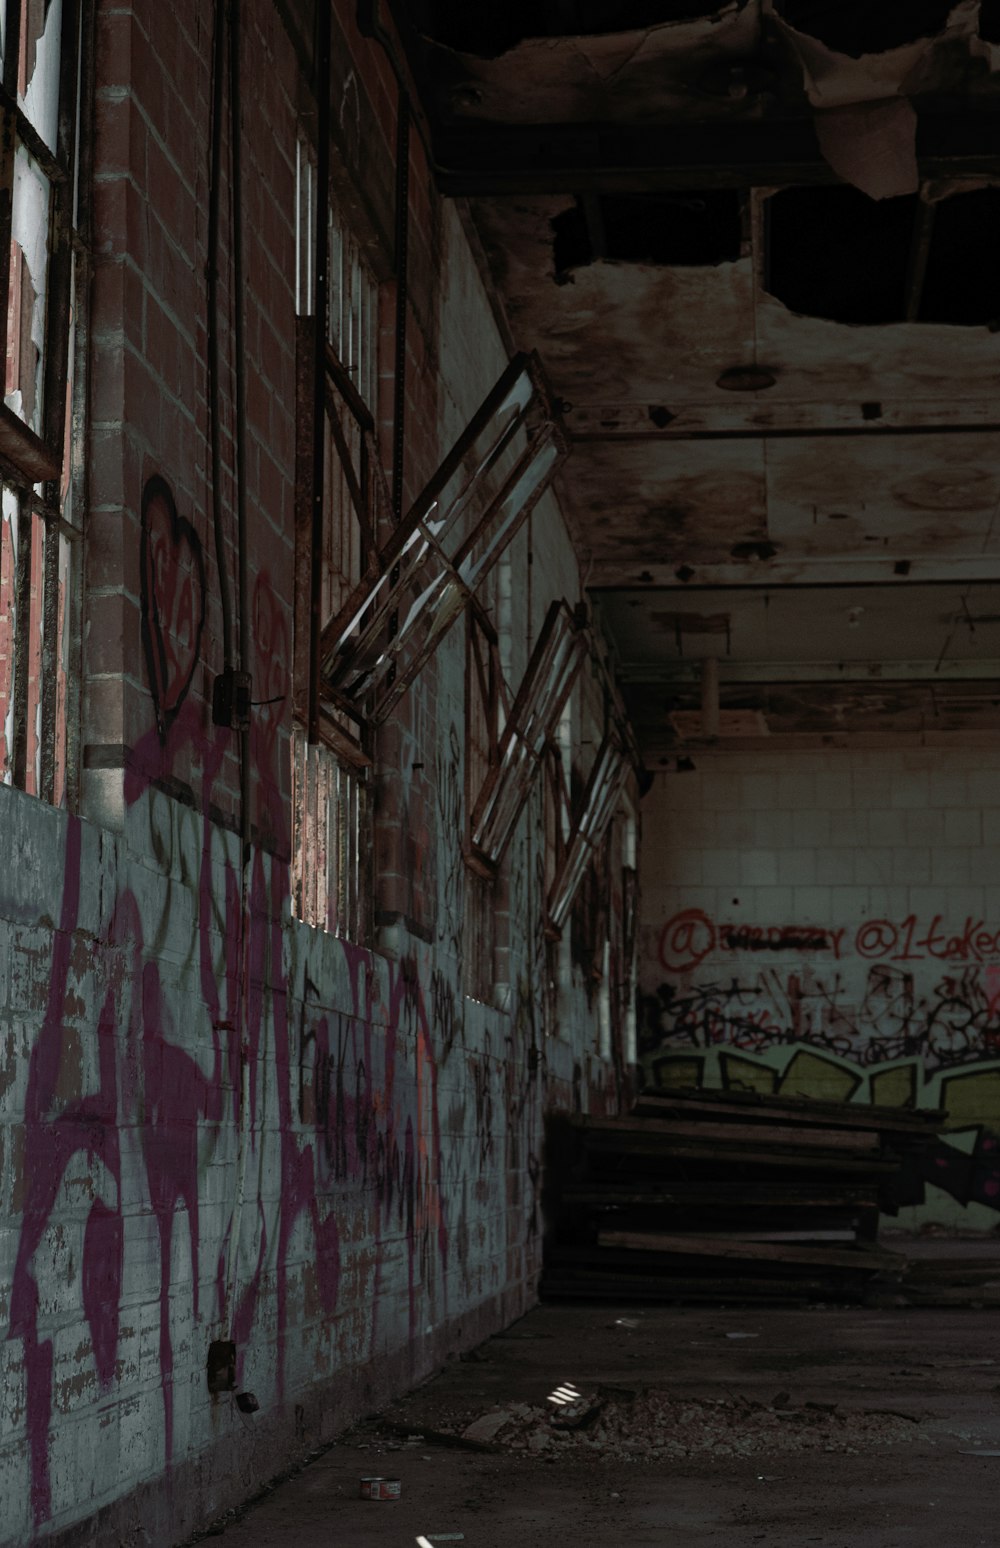 an abandoned building with graffiti on the walls